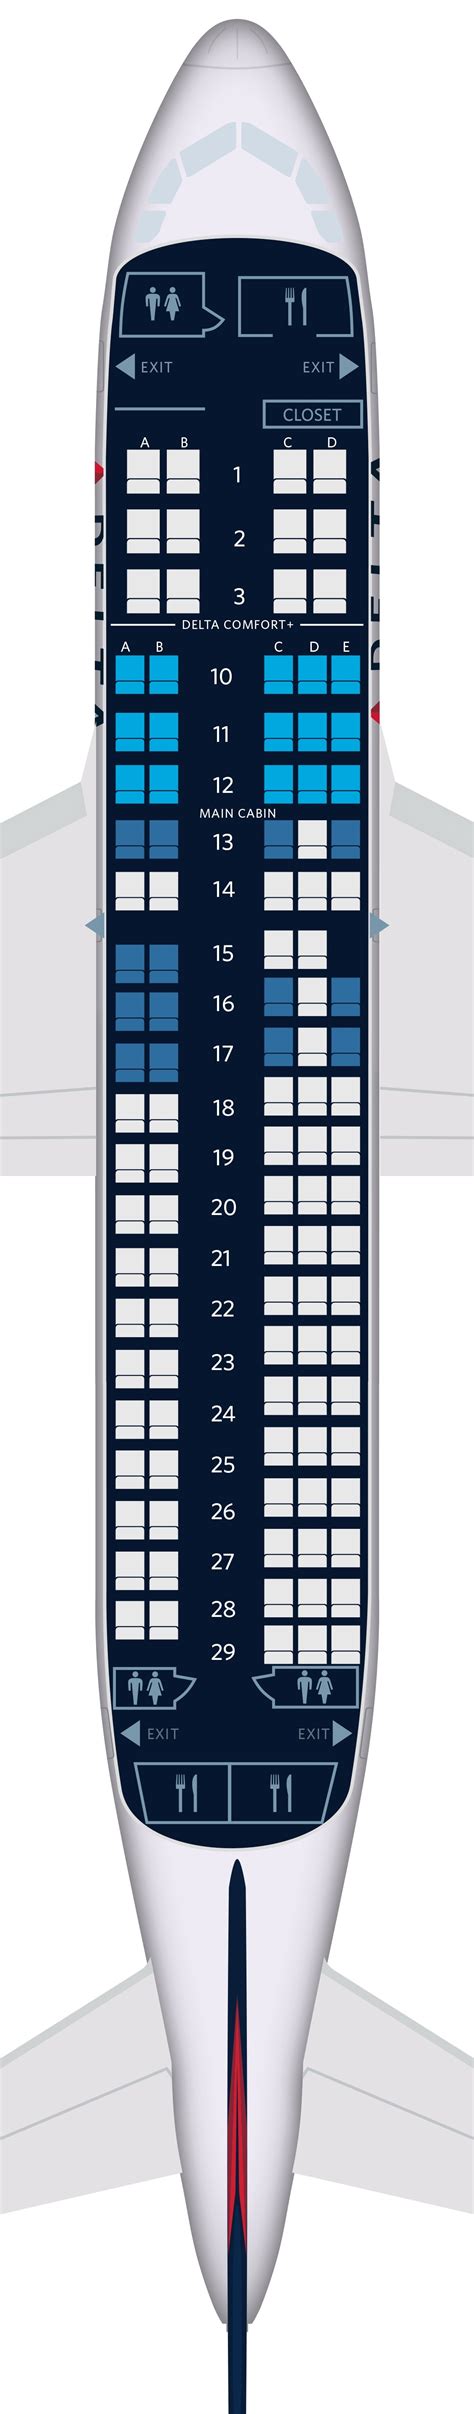 Airbus a220 100 seat map. For your next Delta flight, use this seating chart to get the most comfortable seats, legroom, ... Airbus A220-100 (CS1) Airbus A319 (319) Airbus A320 (32K) Layout 1; 